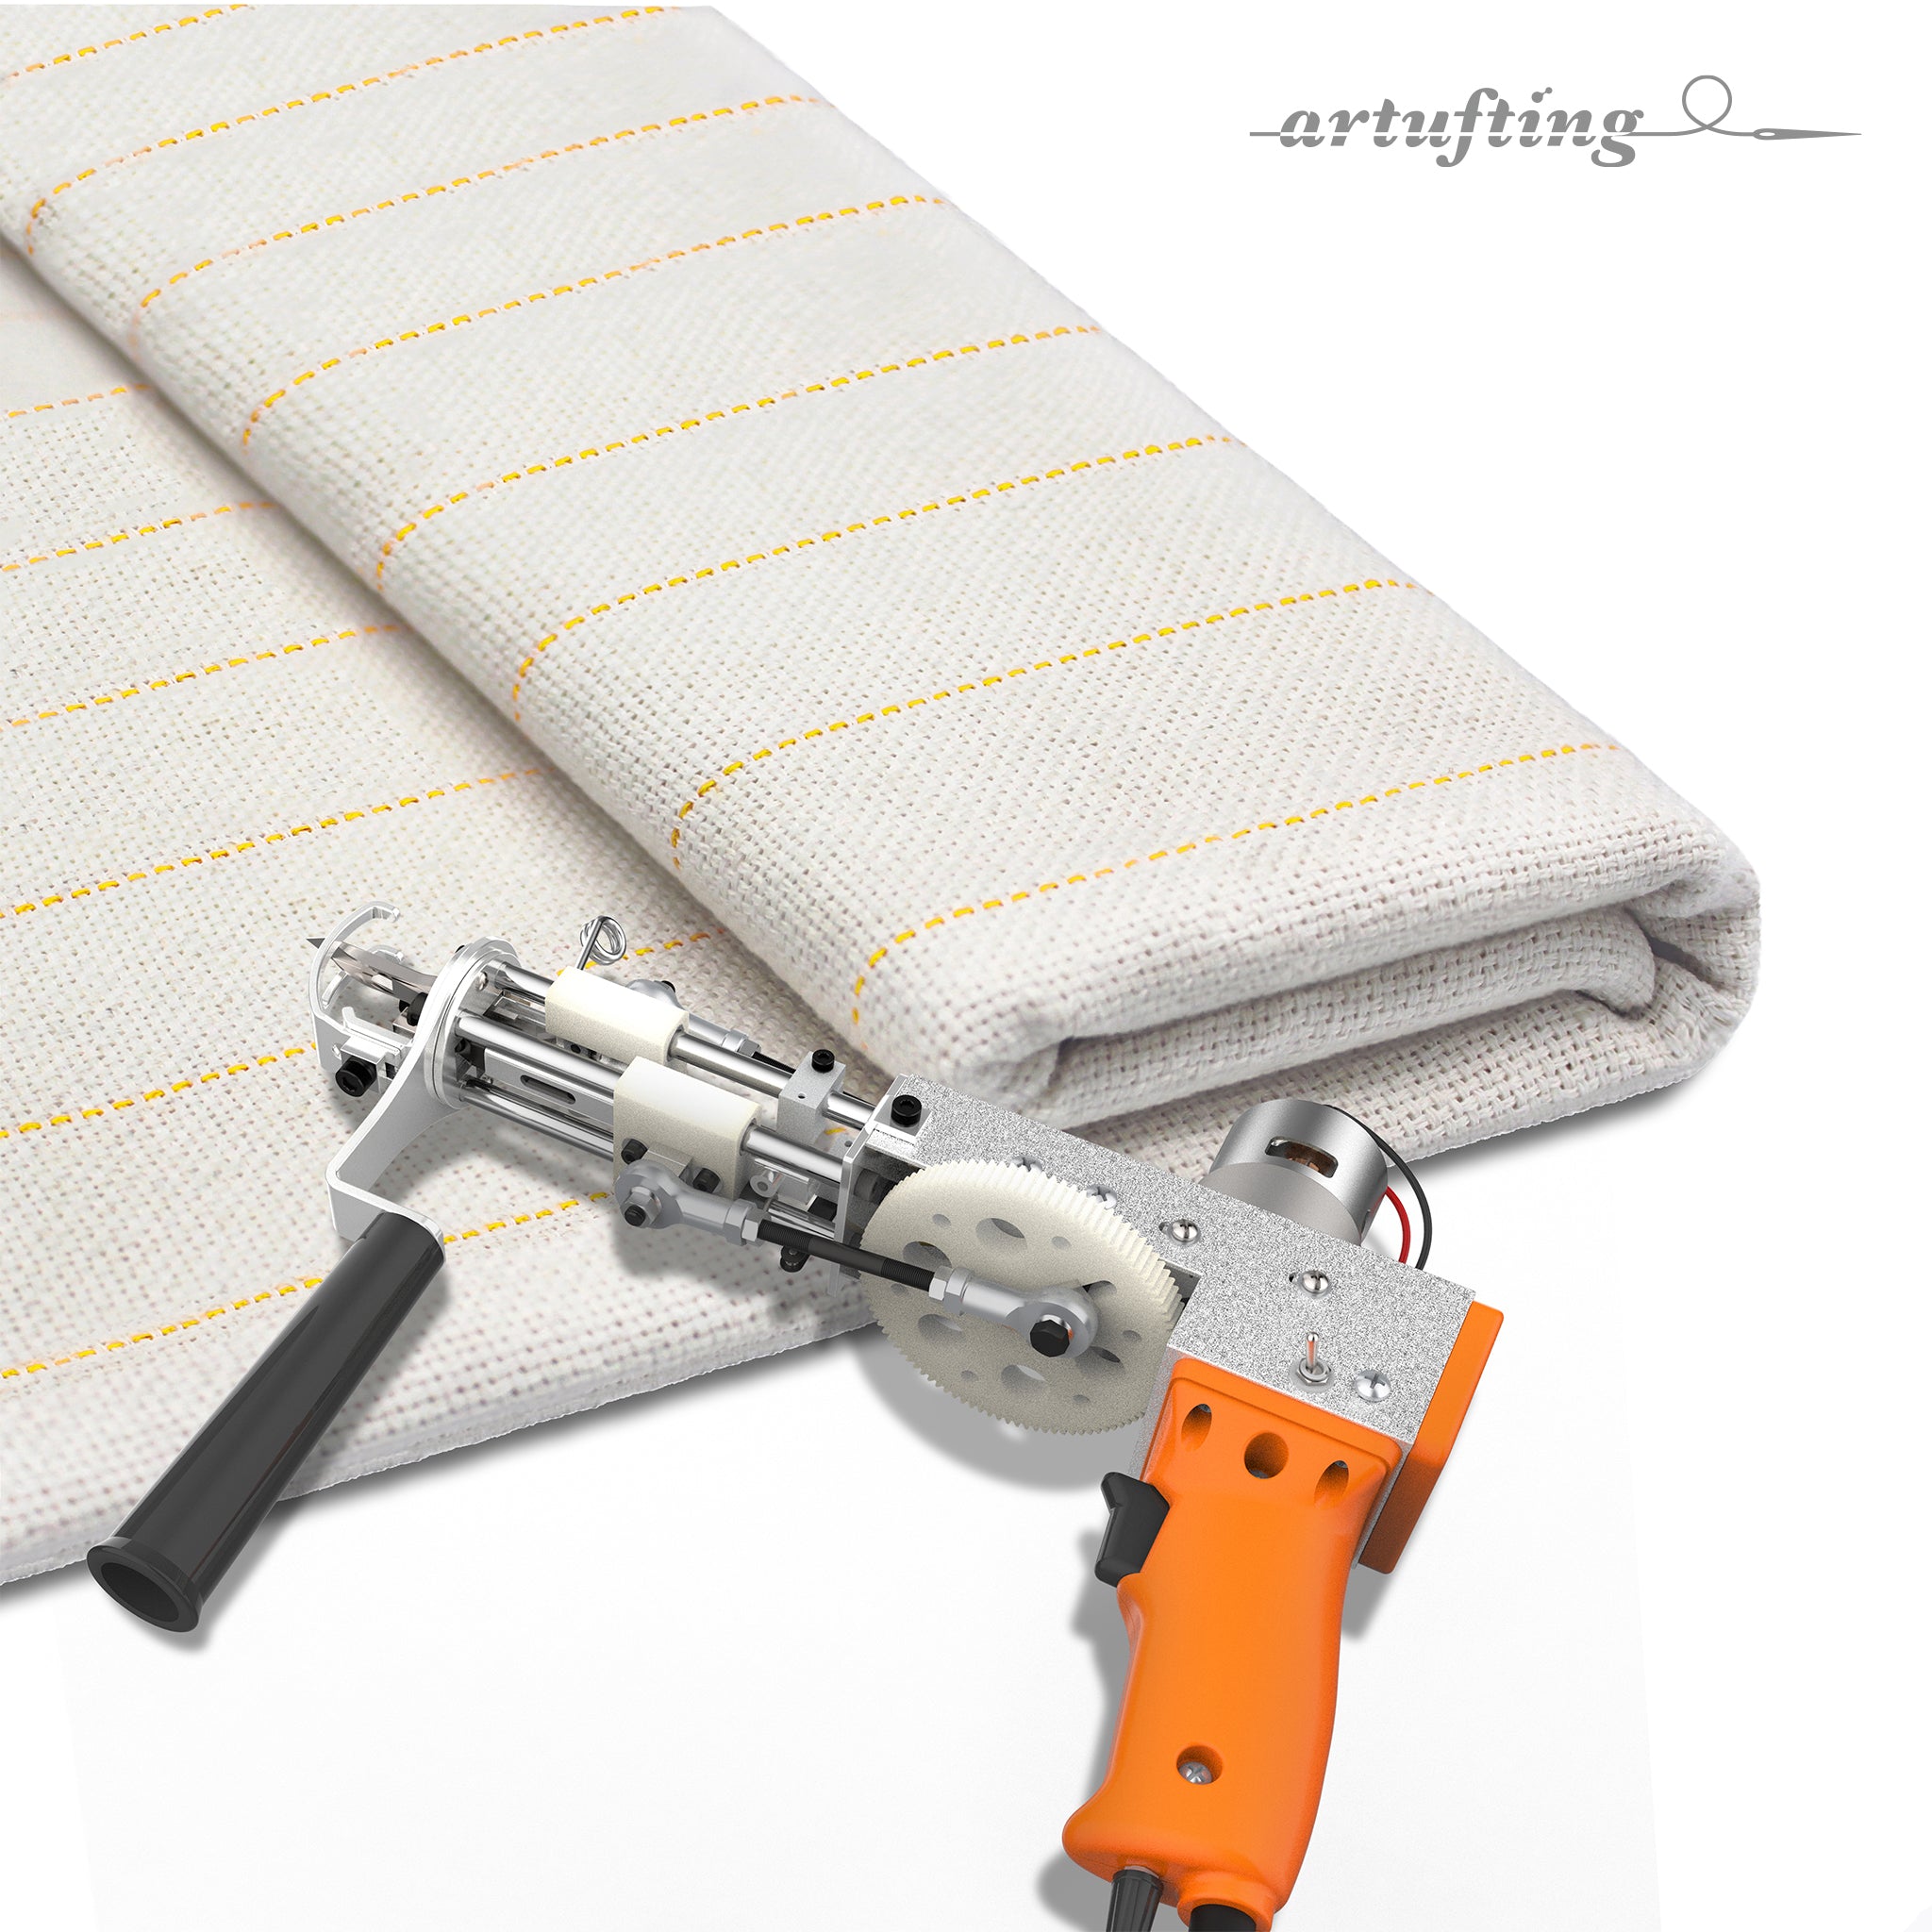 59 x 59 Primary Tufting Cloth with Marked Lines, Monks Cloth for Tufting  Gun Punch Needle Rug Backing Fabric DIY Rug Tufting Kit Punch Needle Fabric  for Tufting Gun